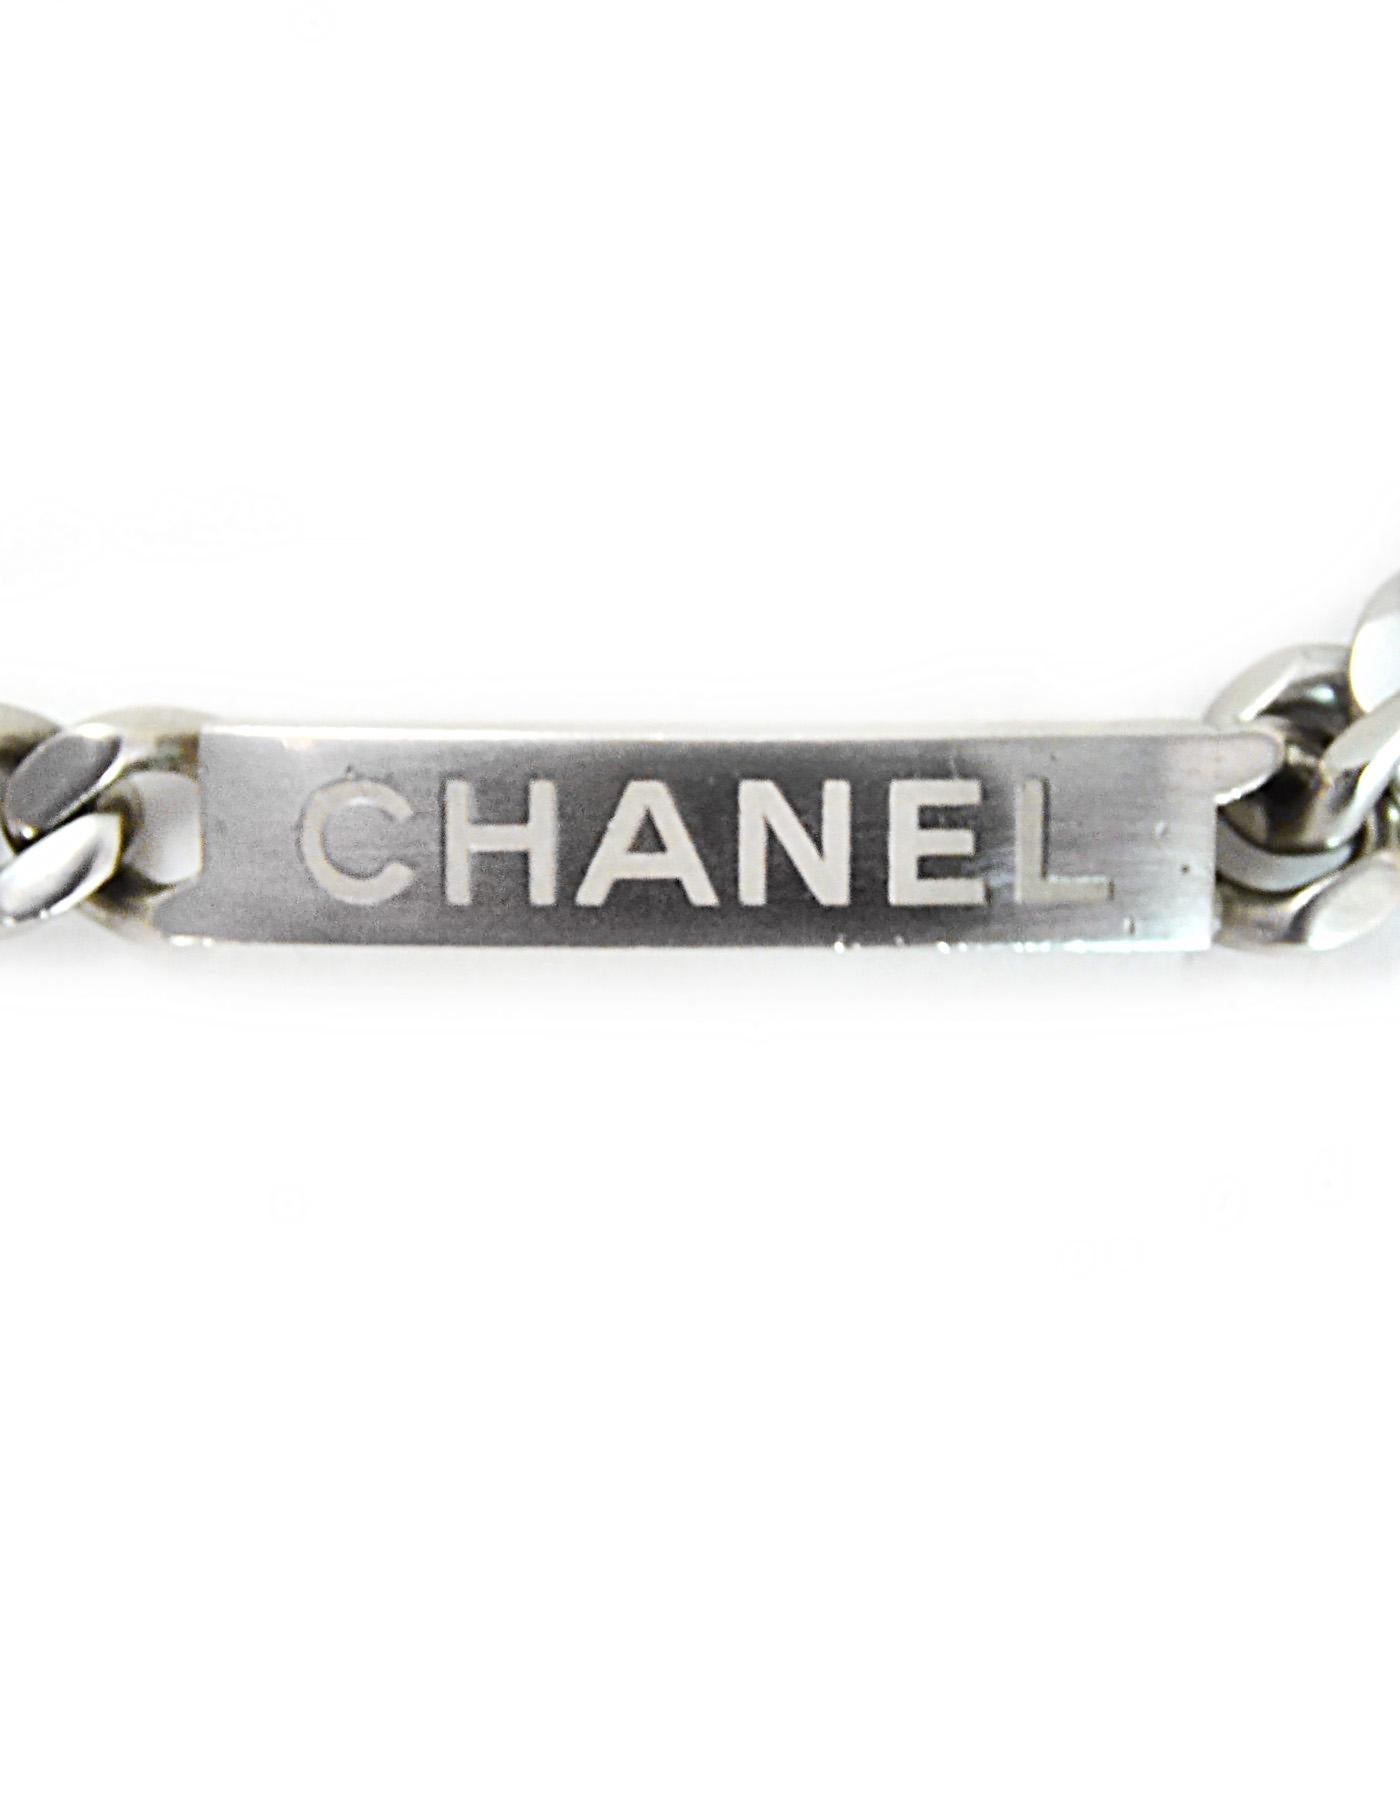 Chanel Silvertone ID Chain Necklace. Features CC charm at end of chain.

Made In: Italy
Color: Matte silvertone
Materials: Metal
Closure: Lobster clasp closure
Stamp: Chanel B15 P MADE IN ITALY
Overall Condition: Very good pre-owned condition. Nicks